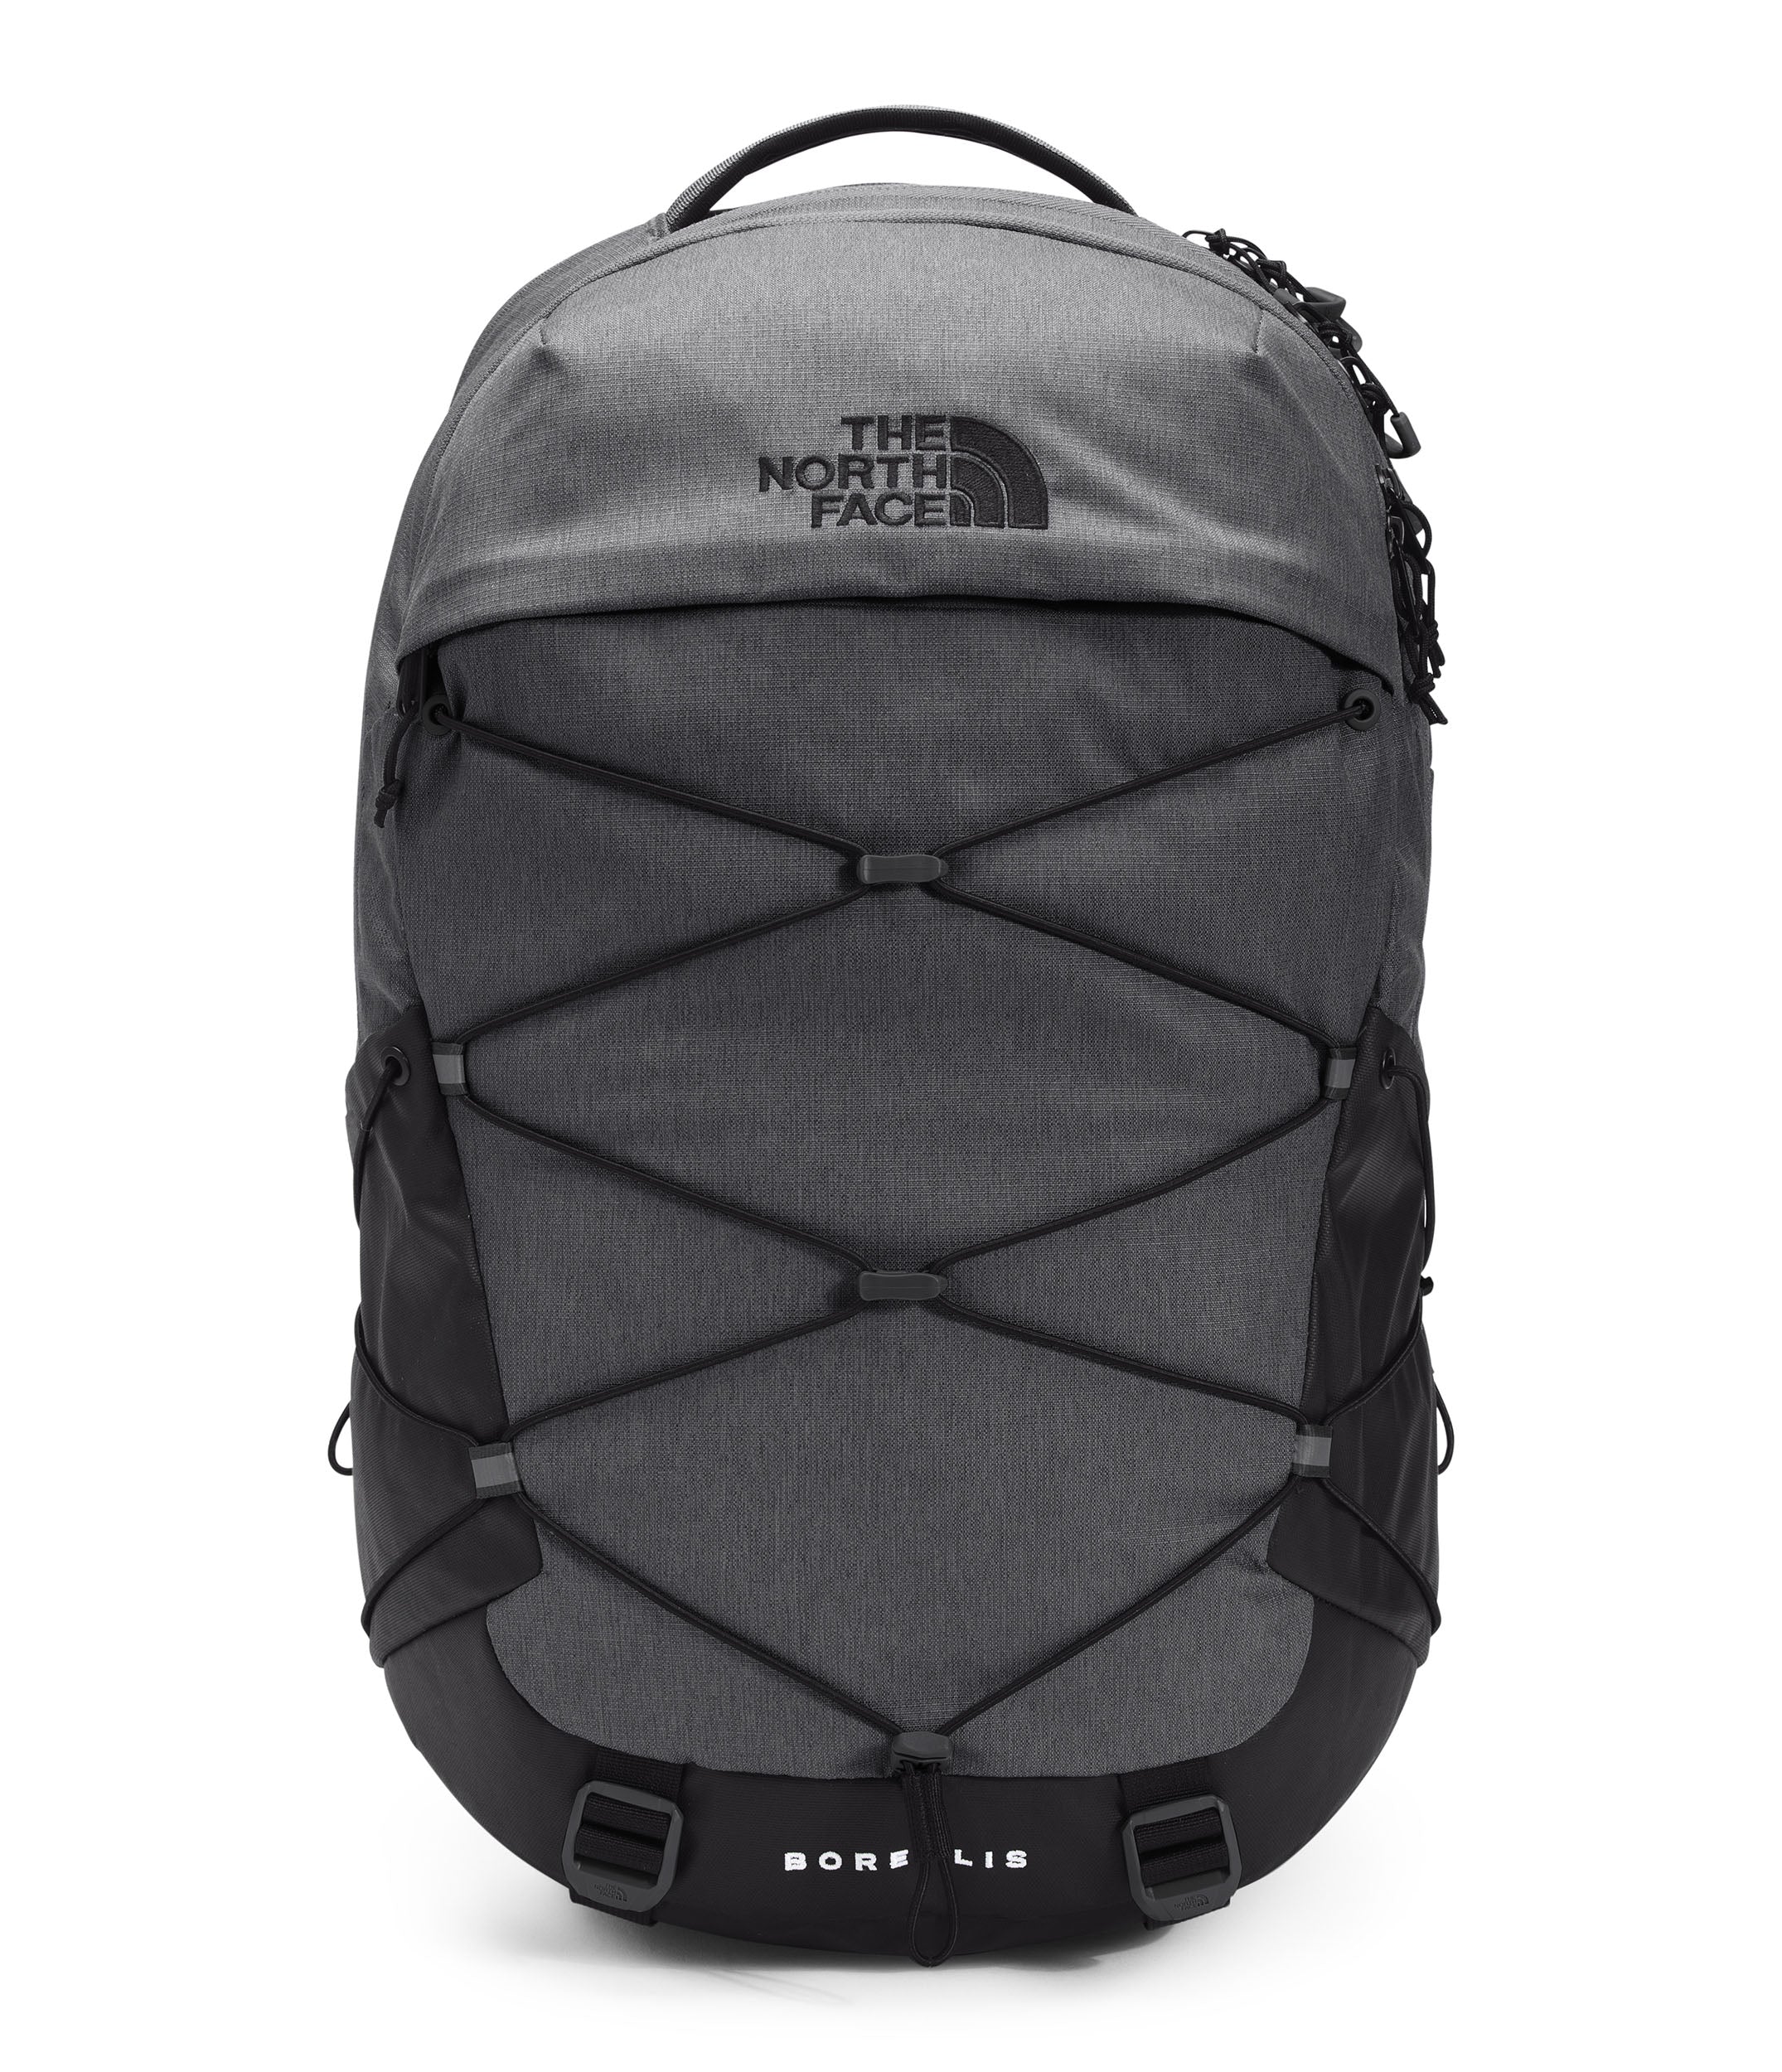 The North Face Borealis Backpack Accessories North Face Asphalt Grey Light Heather/TNF Black-YLM  